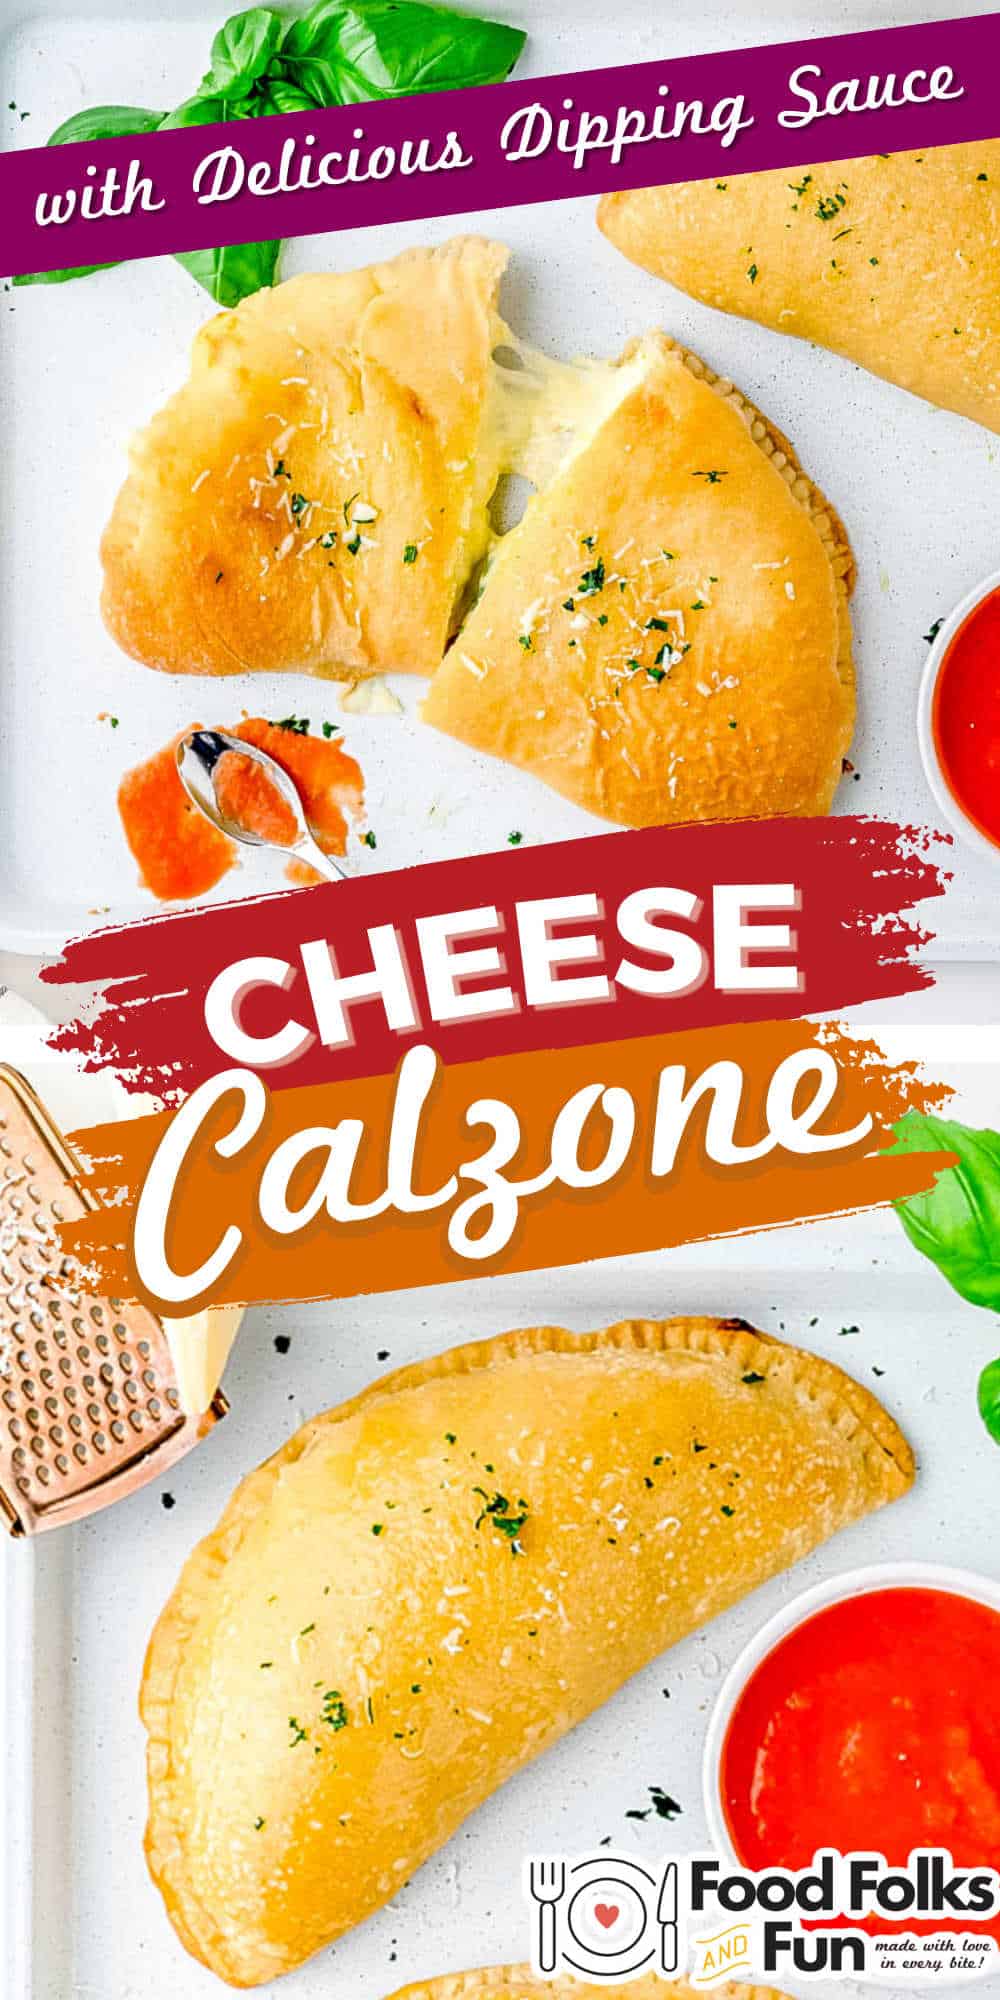 This homemade Cheese Calzone recipe makes six large calzones. They're filled with ricotta, mozzarella, Parmesan, and fresh herbs. via @foodfolksandfun